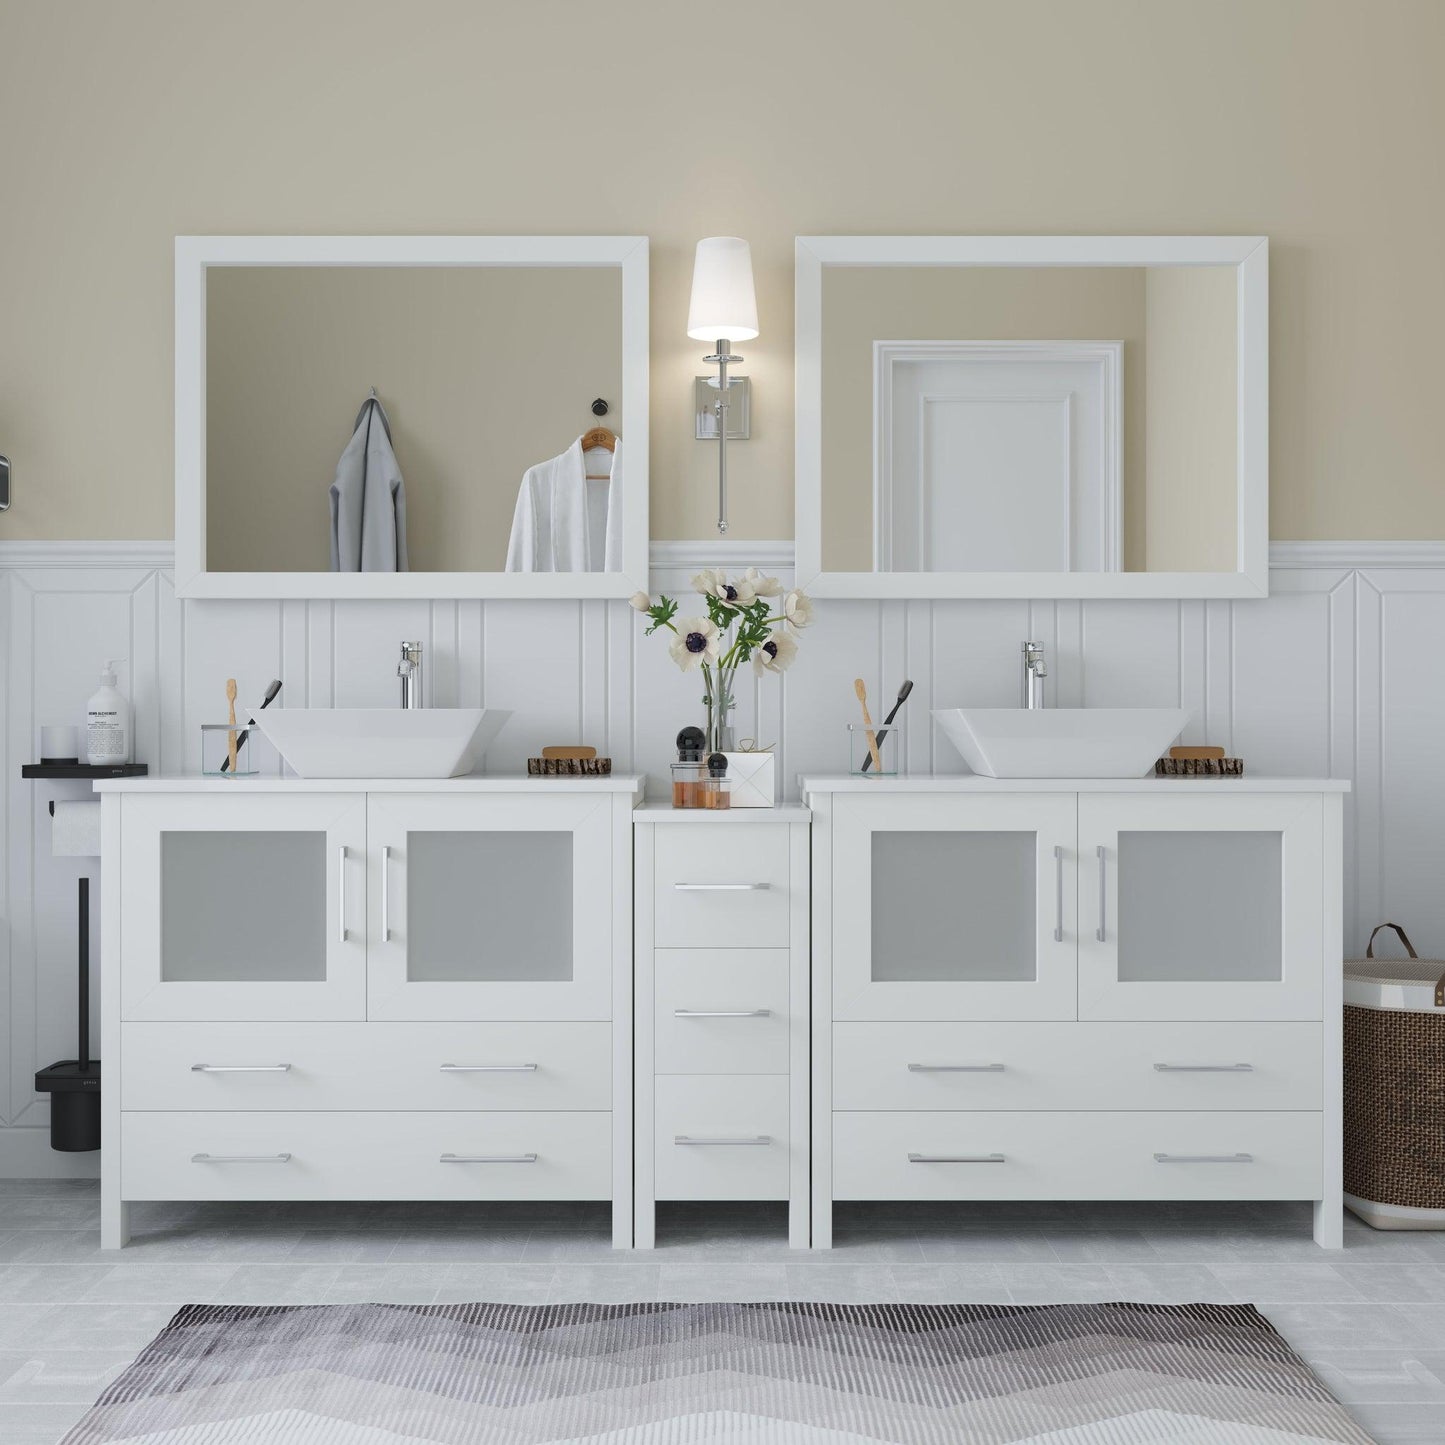 Vanity Art Ravenna 84" Double White Freestanding Vanity Set With White Engineered Marble Top, 2 Ceramic Vessel Sinks, 1 Side Cabinet and 2 Mirrors